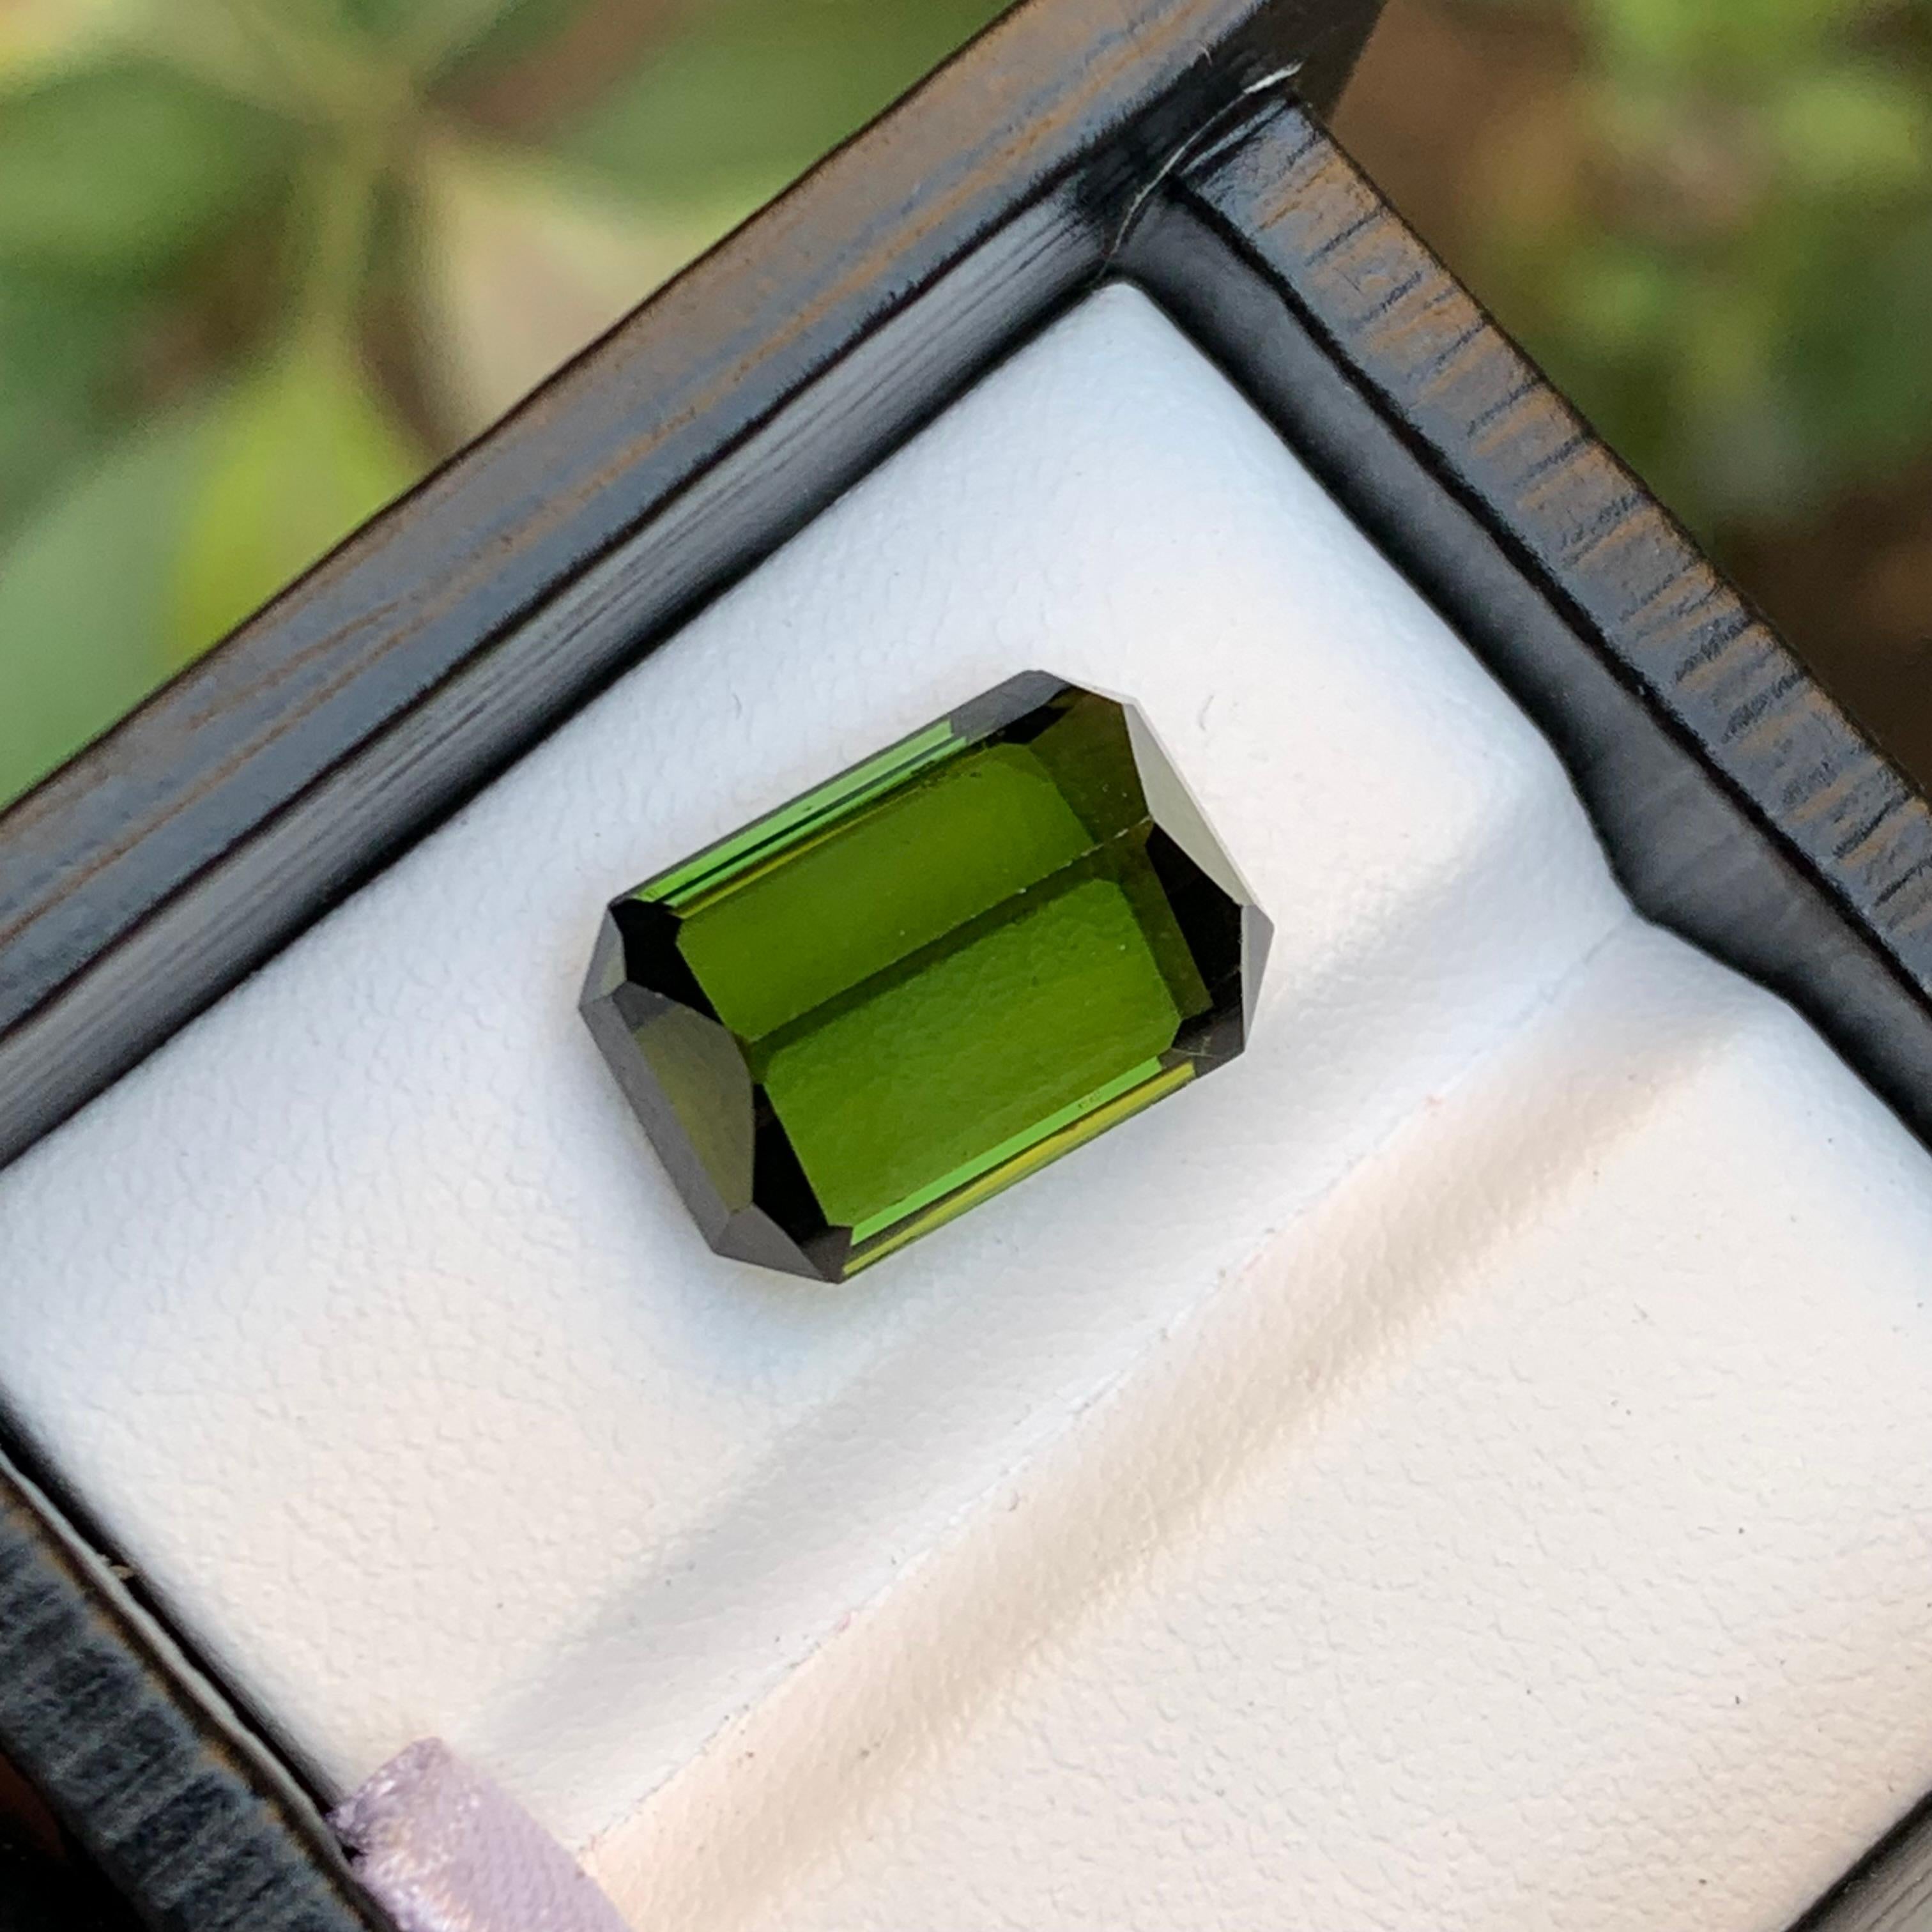 Rare Green Natural Tourmaline Loose Gemstone, 7.75 Ct-Emerald Cut Top Quality For Sale 6